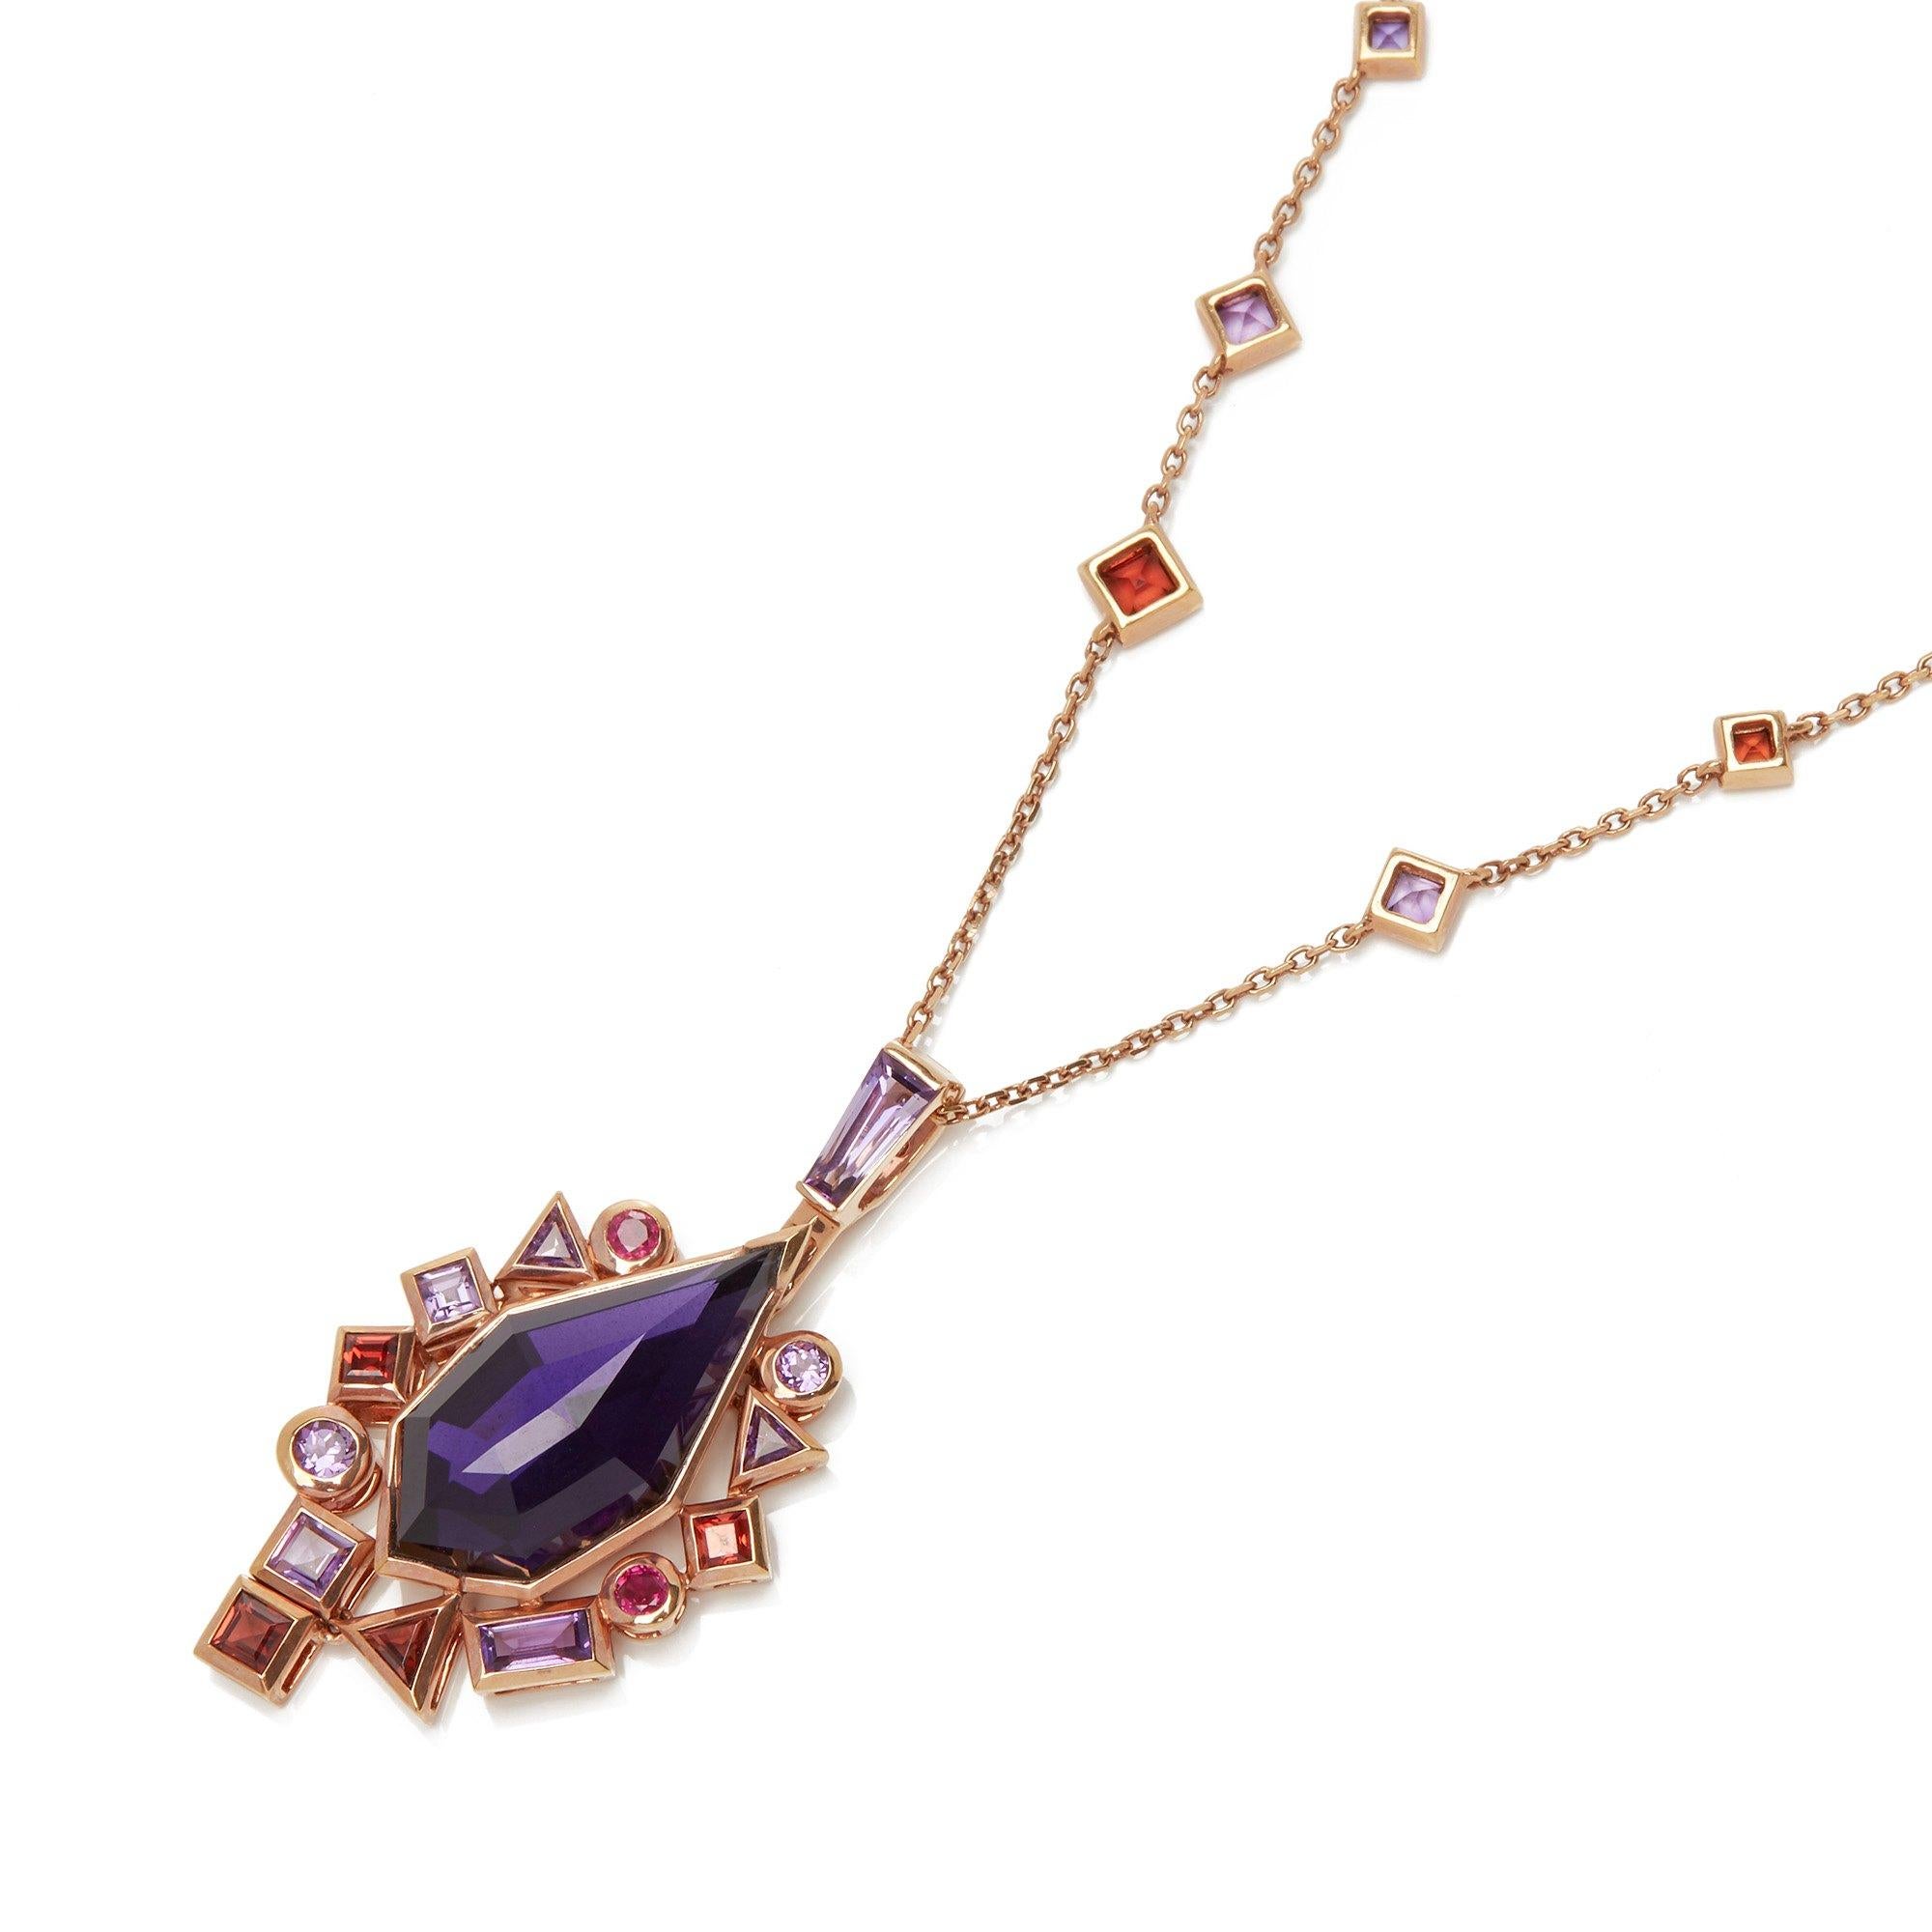 This Pendant by Stephen Webster is from his Crystal Haze Gold Struck Collection and features One Synthetic Amethyst Totalling 1.41cts Surrounded by mixed cut Amethyst and Red Garnets. Set in 18k Rose Gold with 45cm Rose Gold Trace Link Chain. 